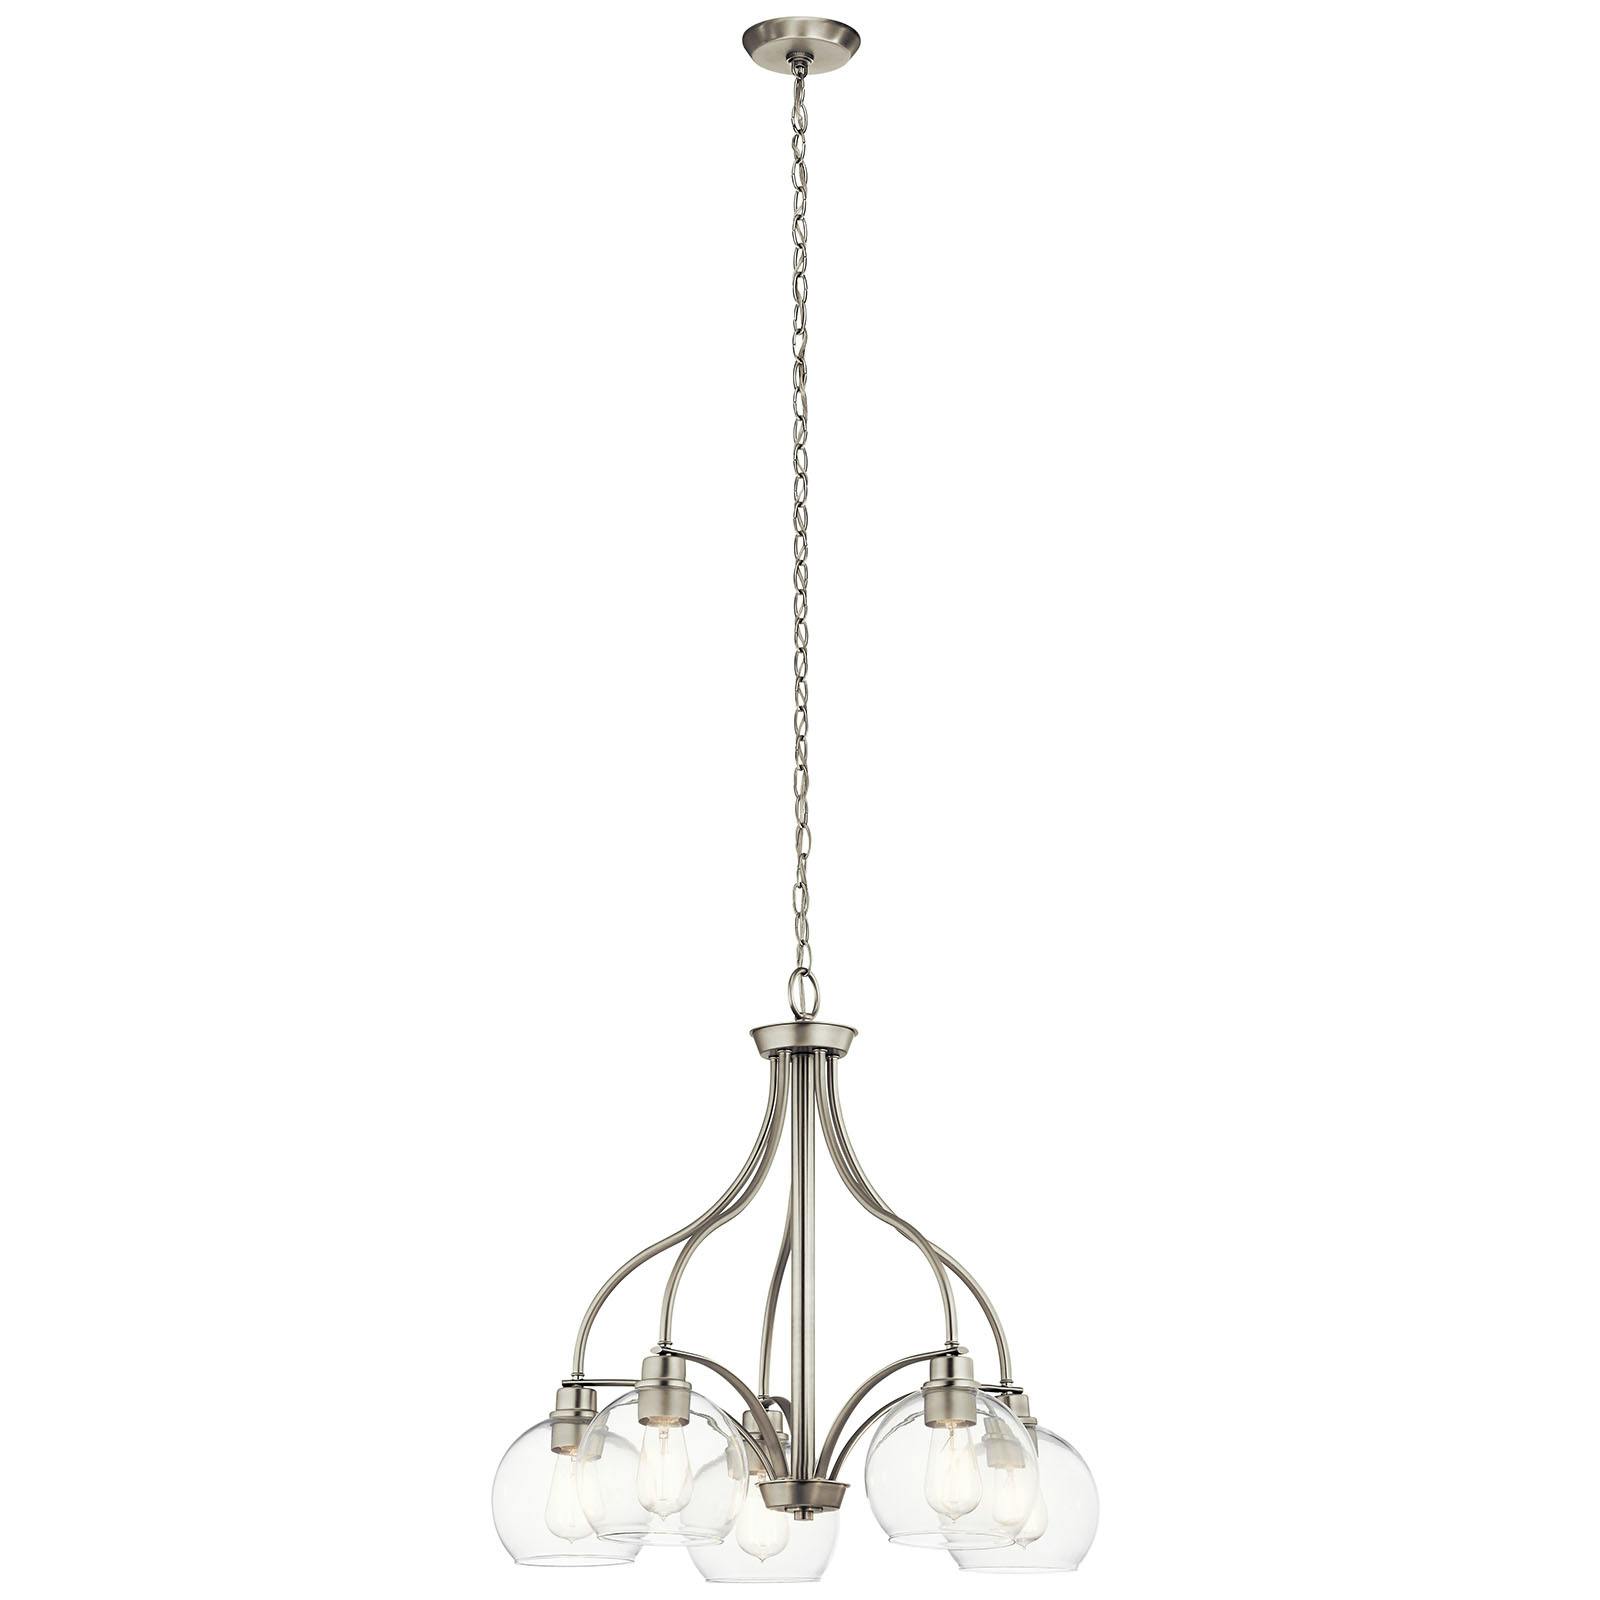 Harmony 5 Light Chandelier Brushed Nickel on a white background